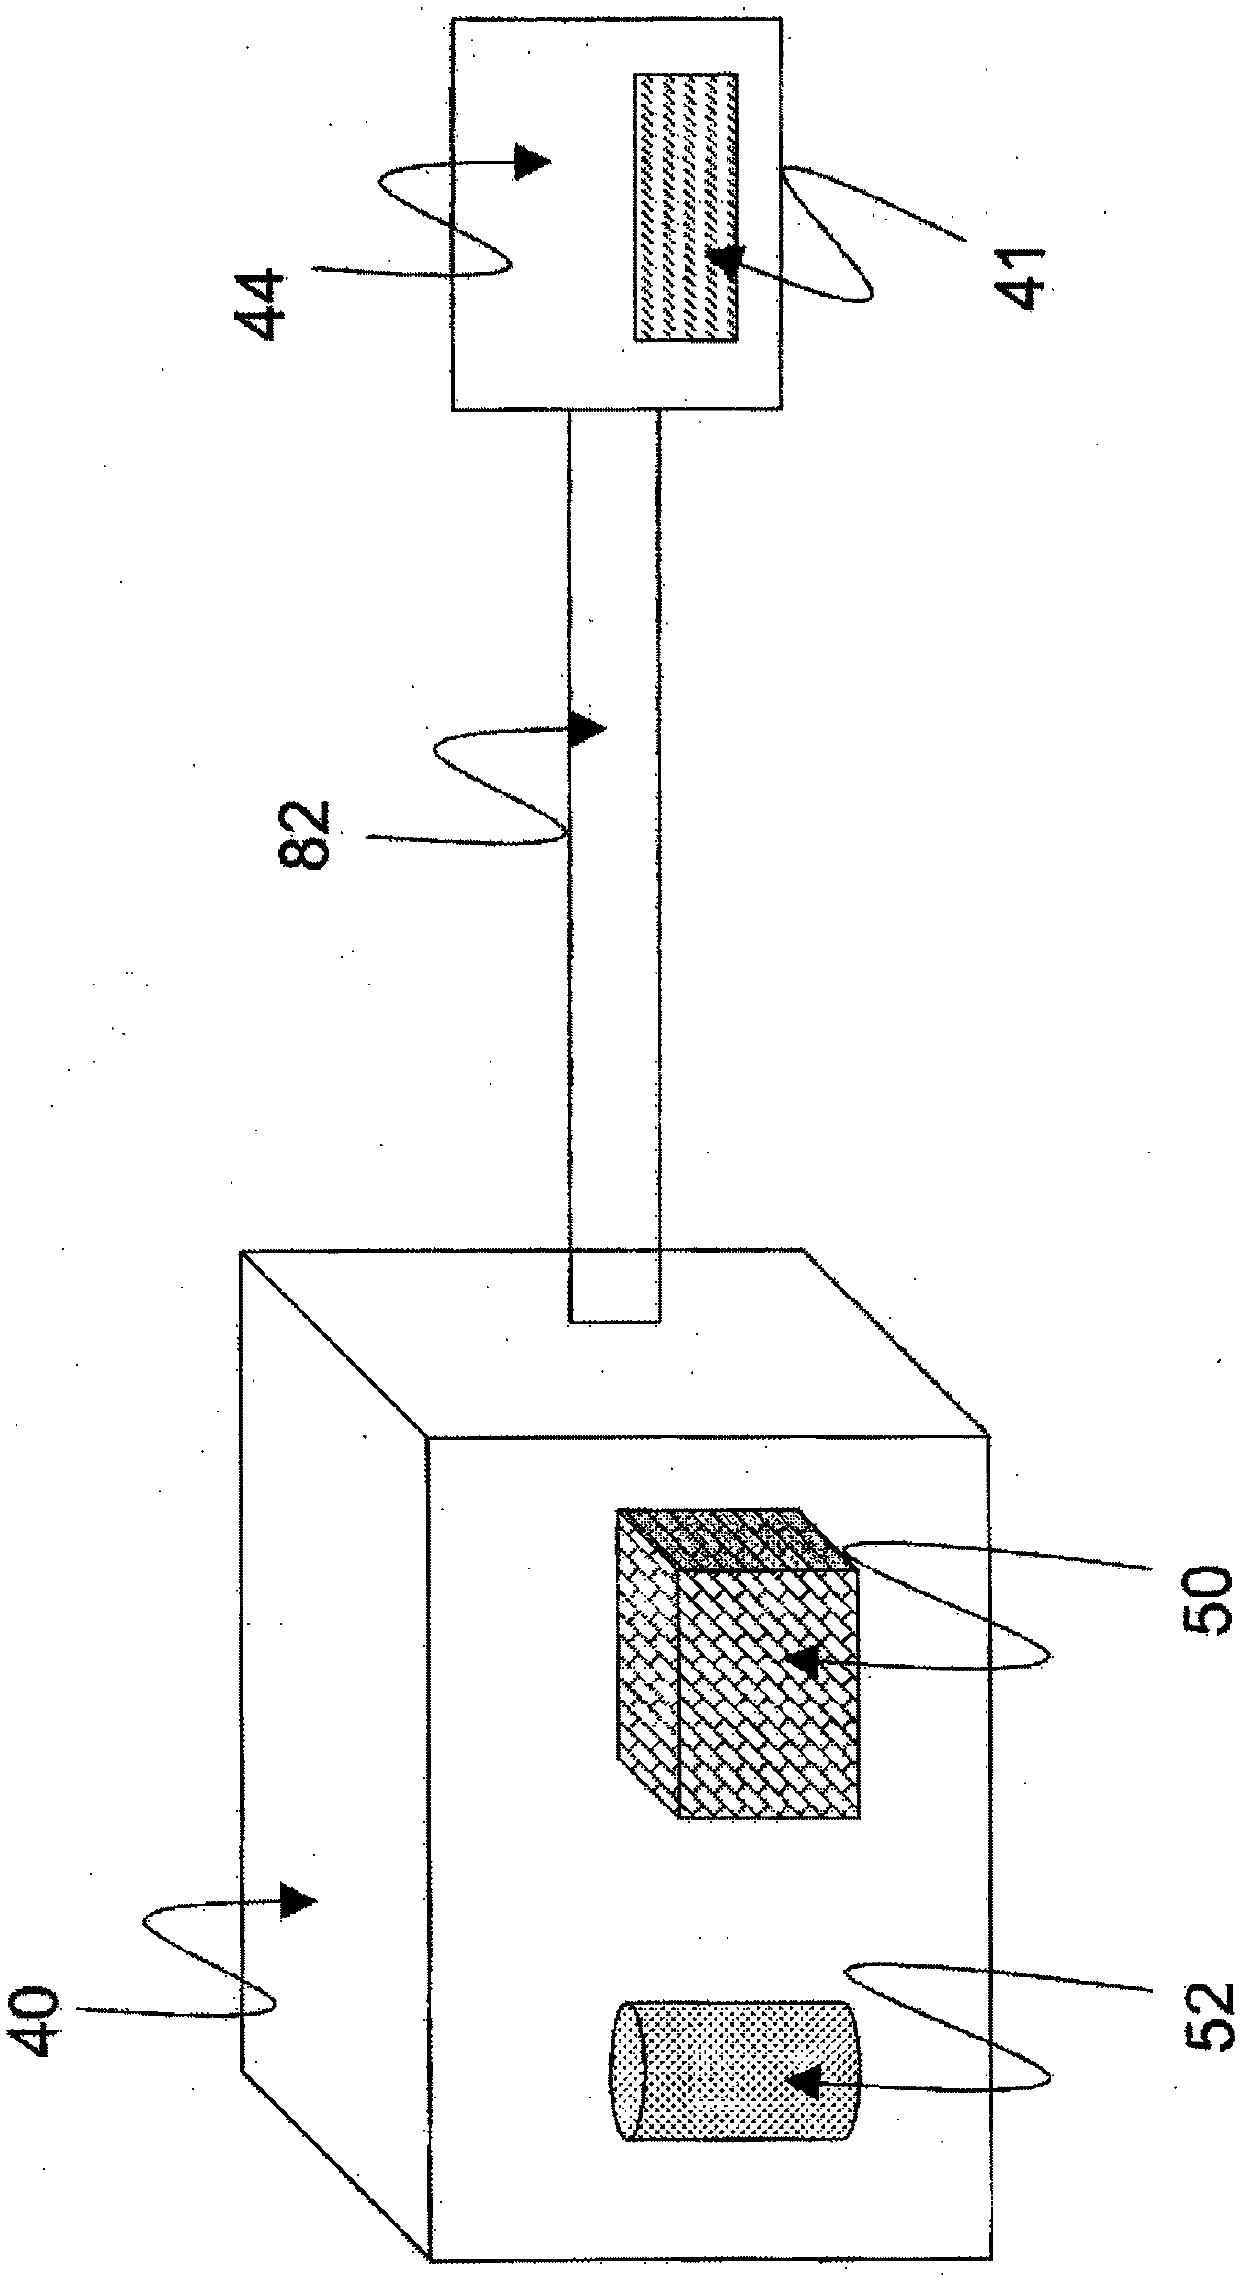 Droplet microfluidic device and methods of sensing the results of an assay therein